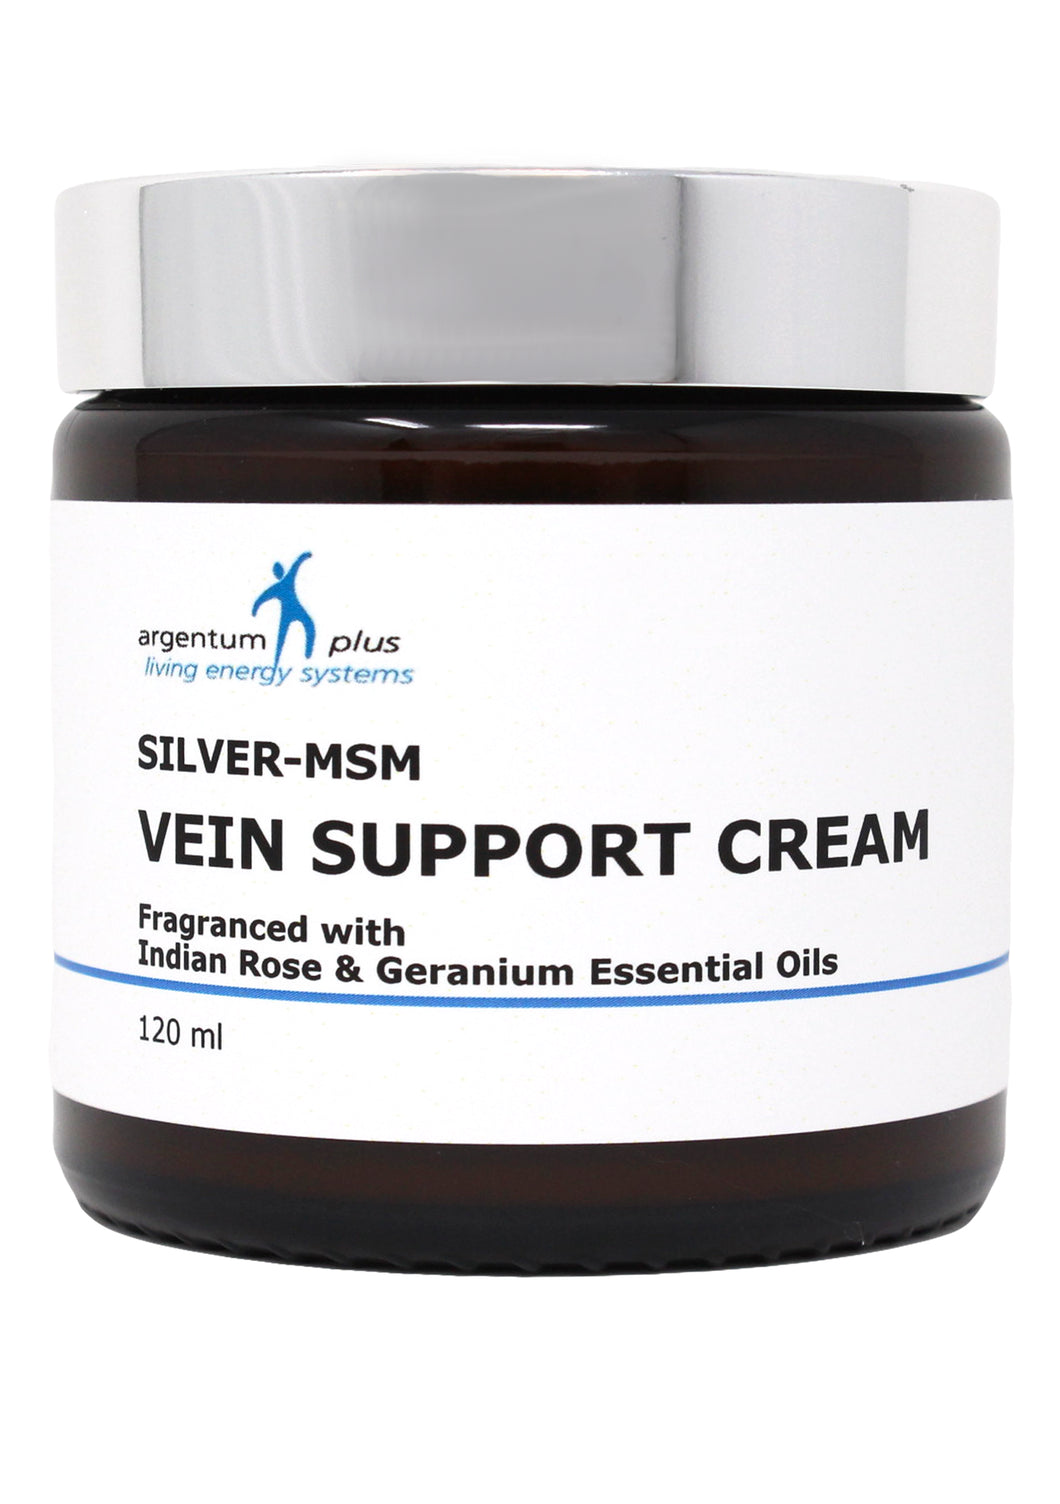 Silver-MSM Vein Support Cream with Indian Rose and Geranium (2 Size options)